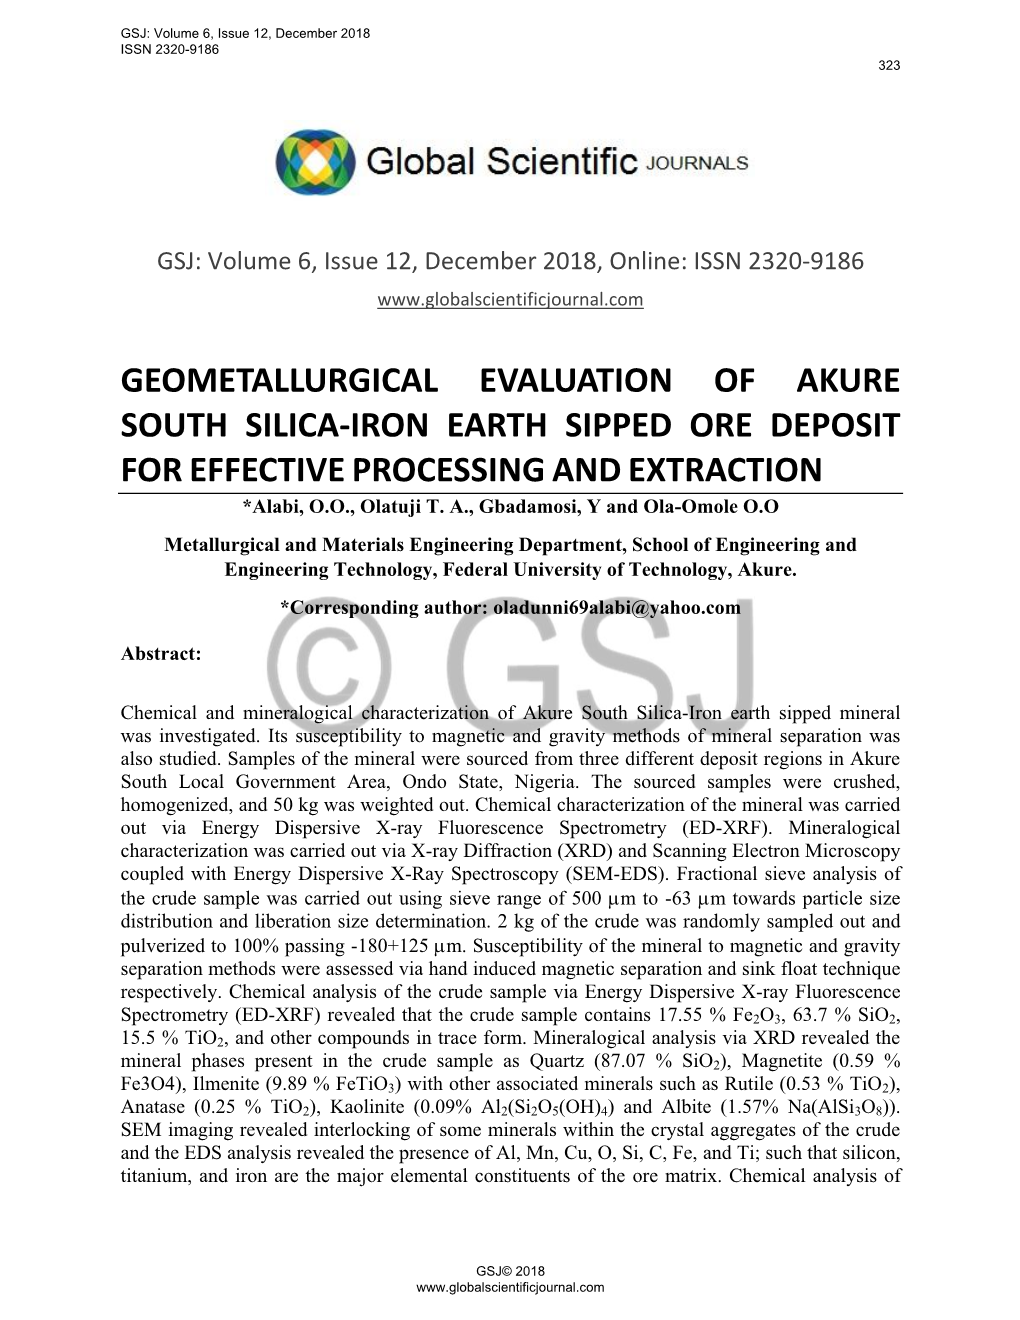 GEOMETALLURGICAL EVALUATION of AKURE SOUTH SILICA-IRON EARTH SIPPED ORE DEPOSIT for EFFECTIVE PROCESSING and EXTRACTION *Alabi, O.O., Olatuji T